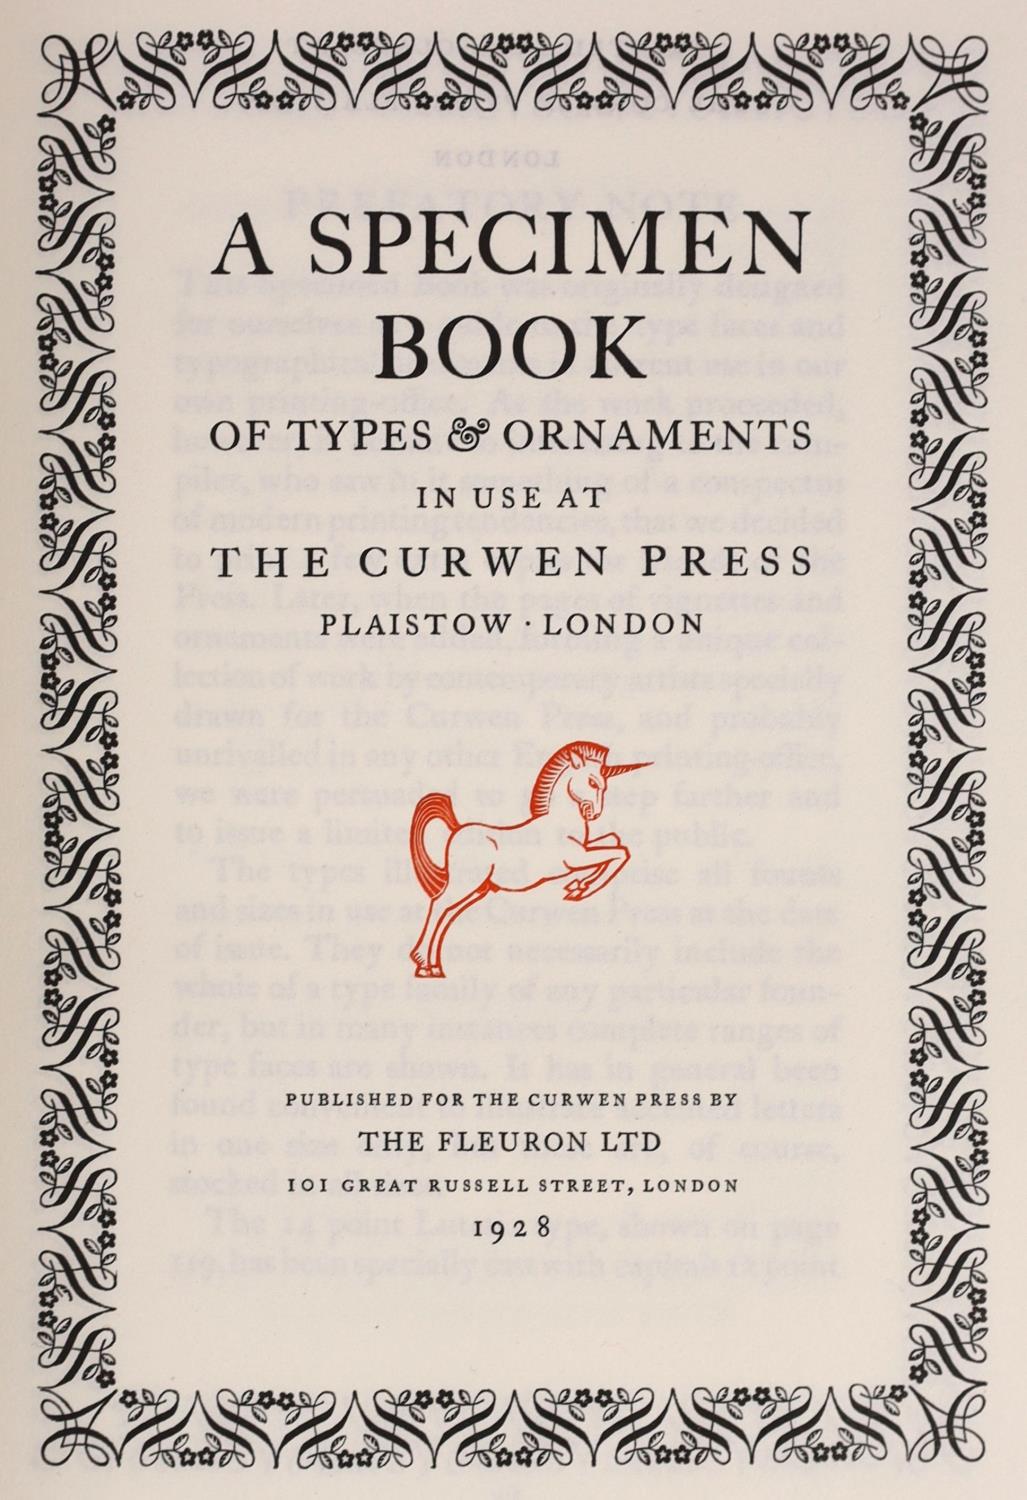 ° ° The Curwen Press - A Specimen Book of Types & Ornaments. 1st and limited ed. one of 135. Adorned